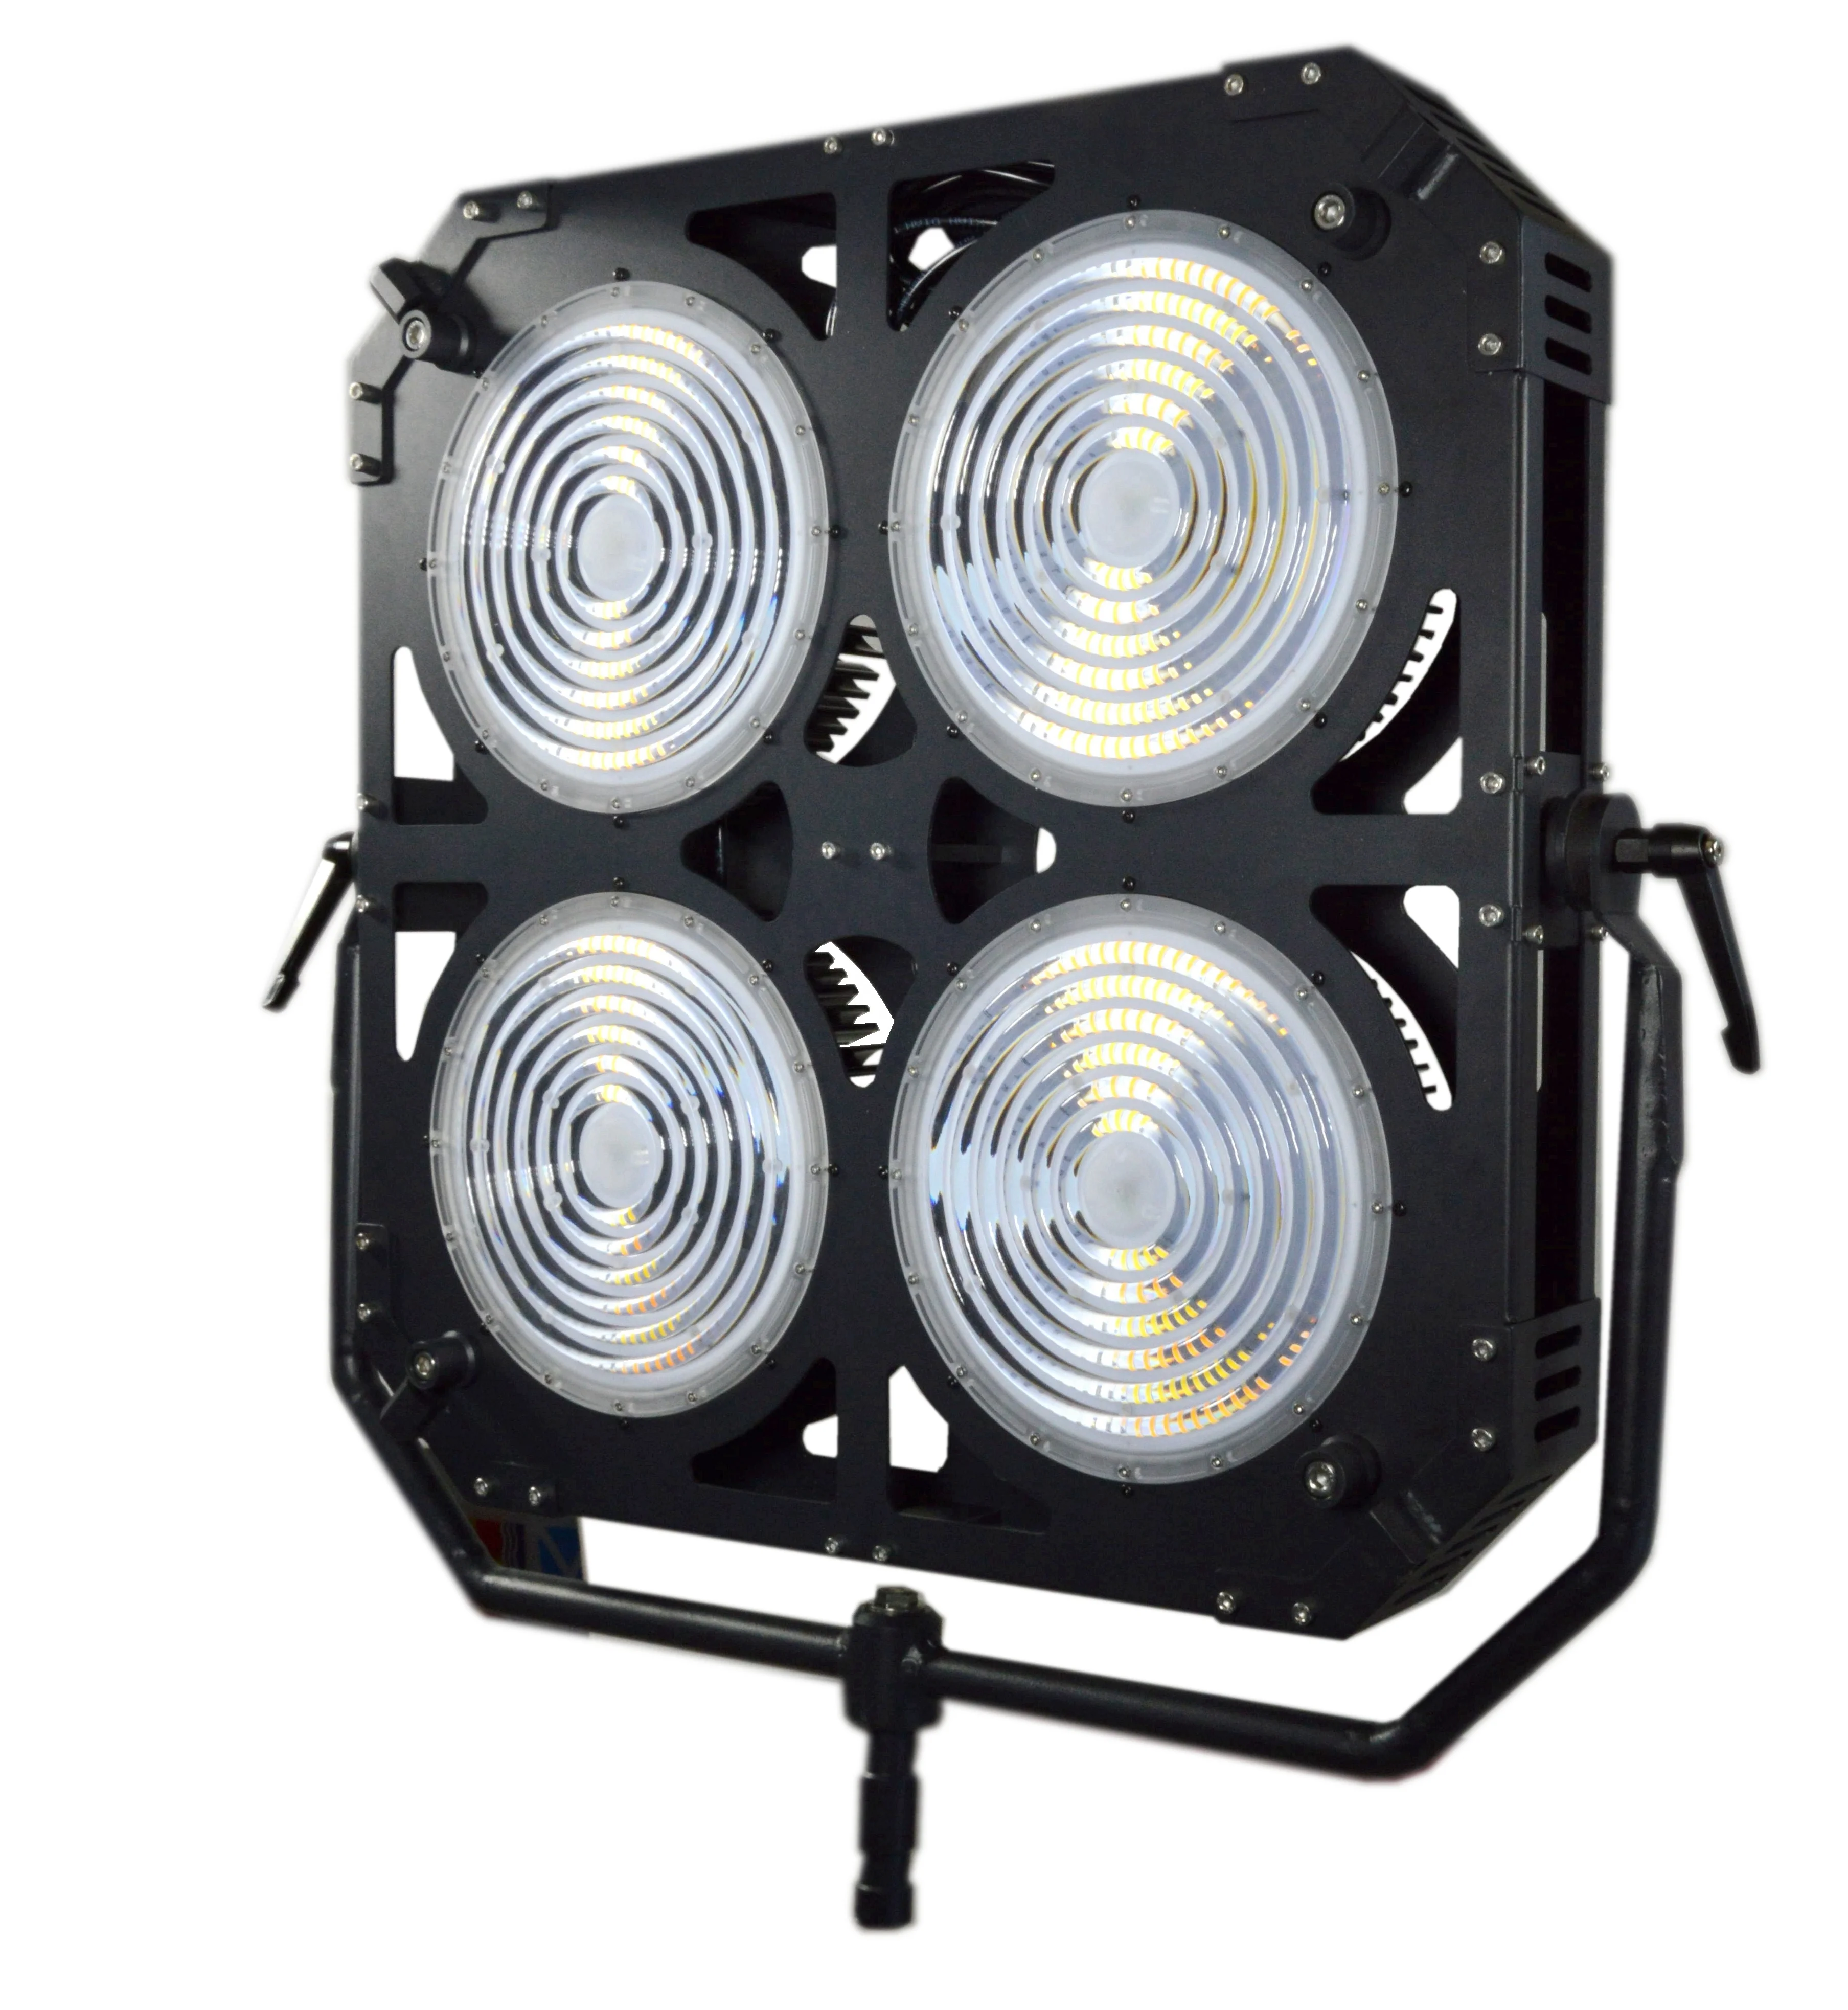 

Video Equipment 750W High Brightness Led Studio Film Space Lighting Bi-Color DMX512 0-100% Dimming for Photography and shooting